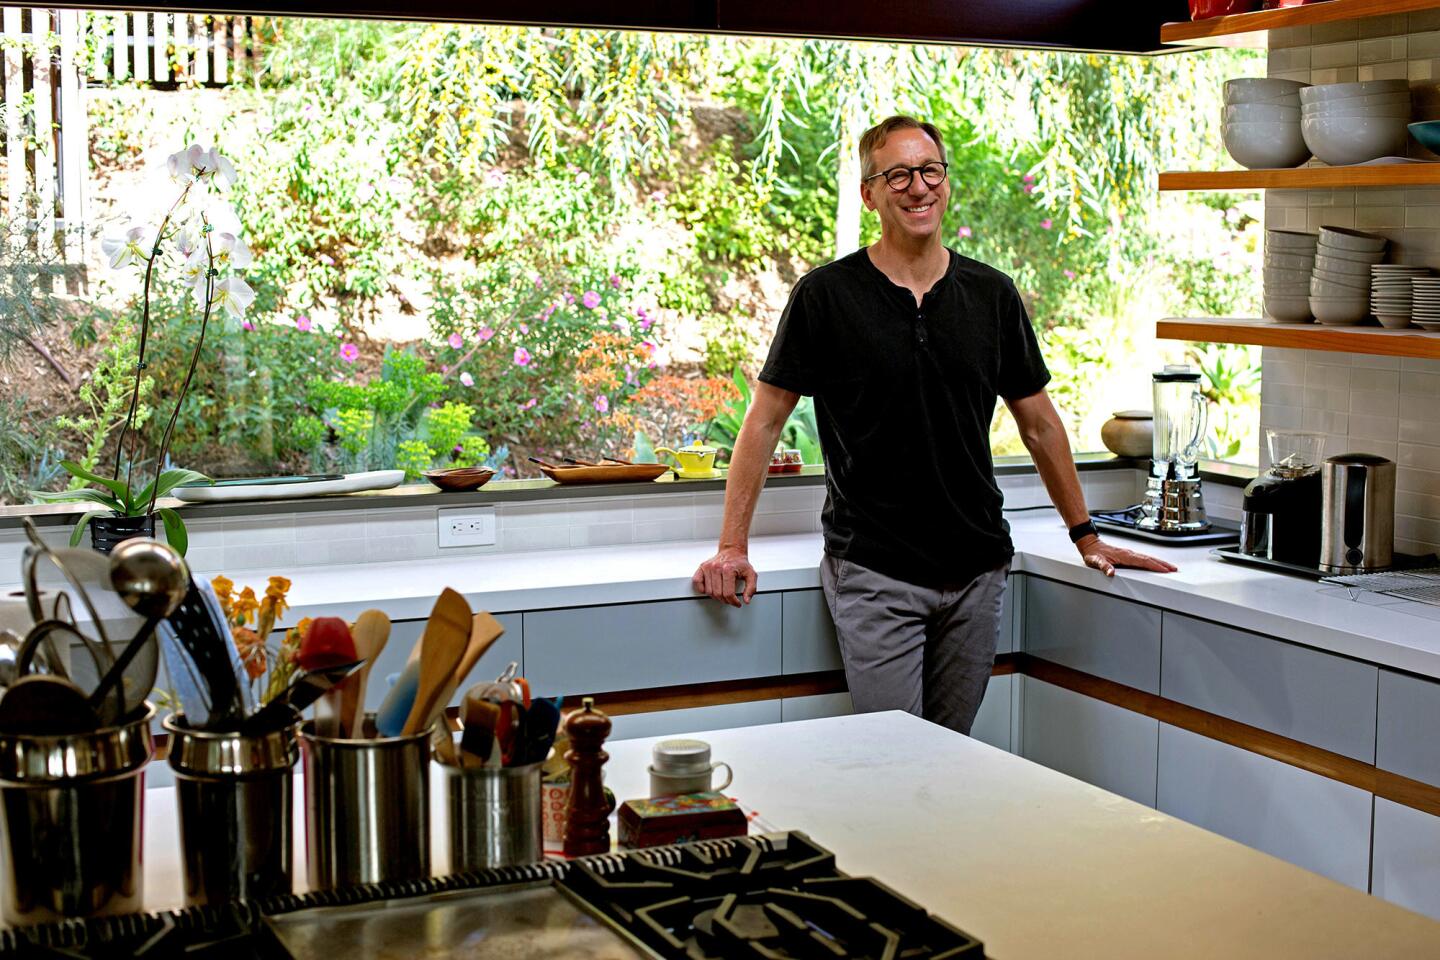 Tim Disney, whose grandfather Roy O. Disney was the brother and business partner of Walt Disney, only recently moved into his 1954 Midcentury Modern home in Silver Lake. But his tailored and contemporary, yet cozy, kitchen has already seen a variety of gatherings — hosting friends, work cohorts and members of his famous family.